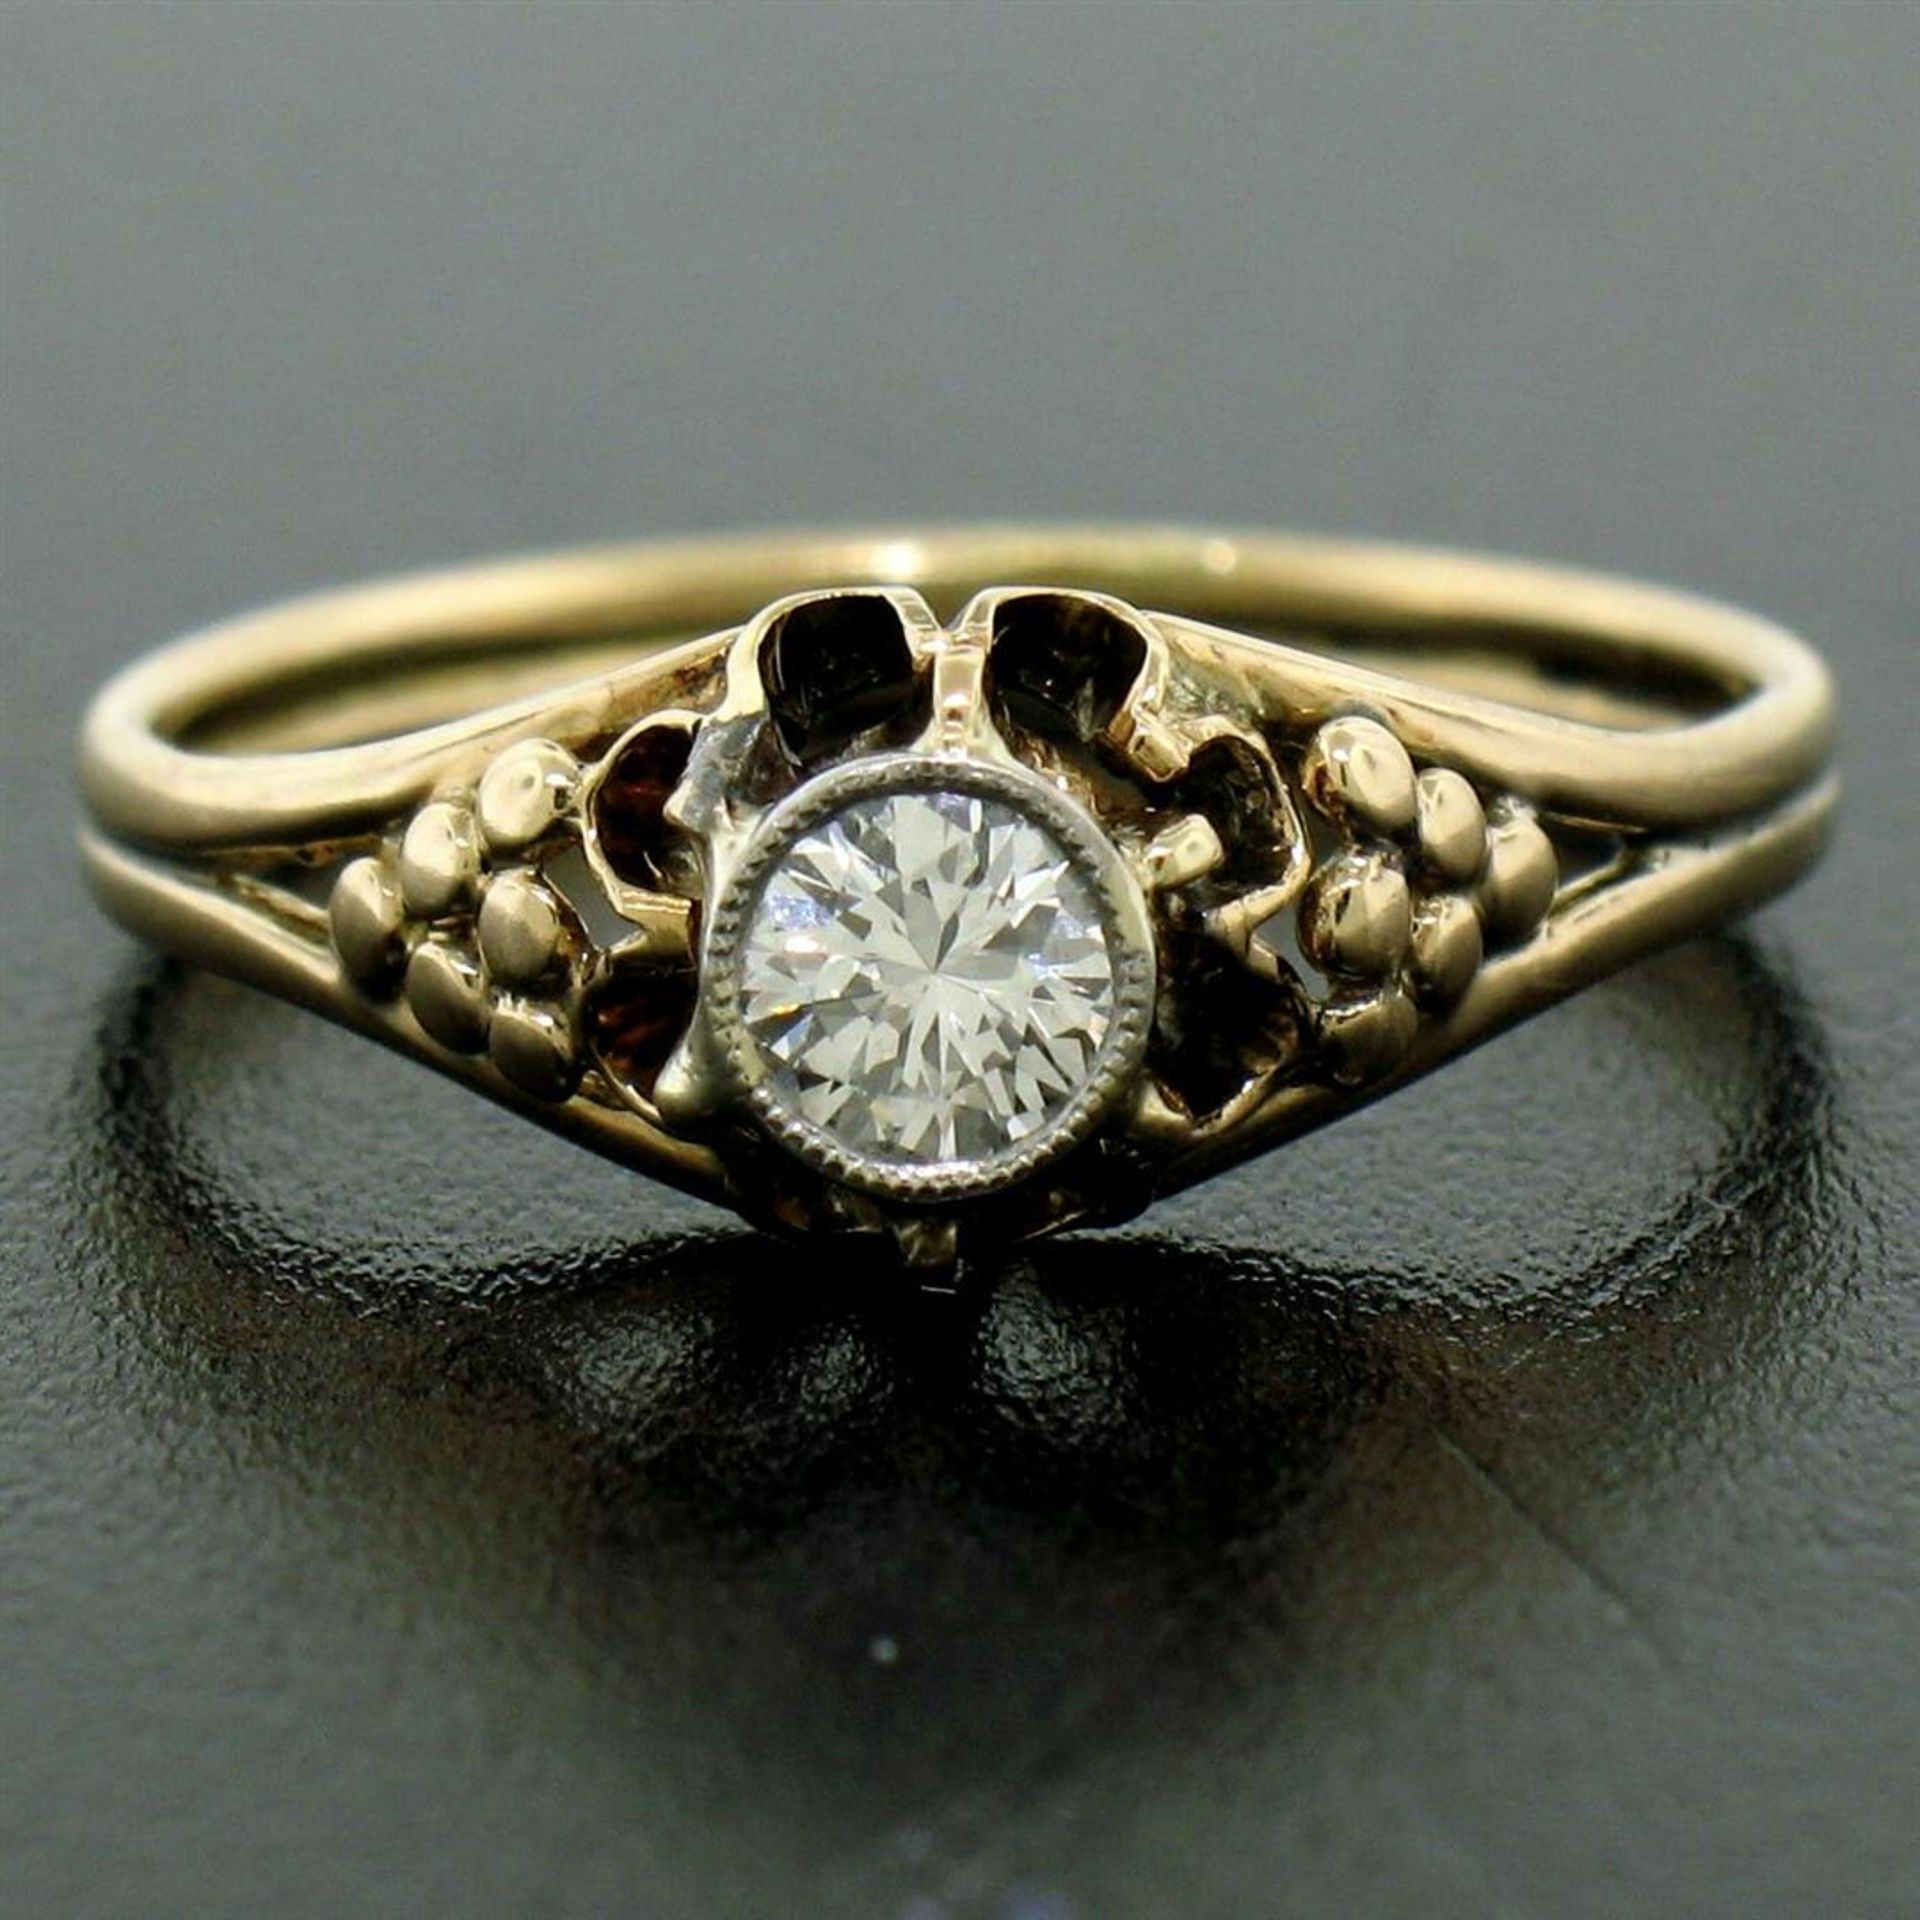 Antique 14kt Yellow and White Gold 0.30 ct Diamond Solitaire Ring - Image 2 of 8